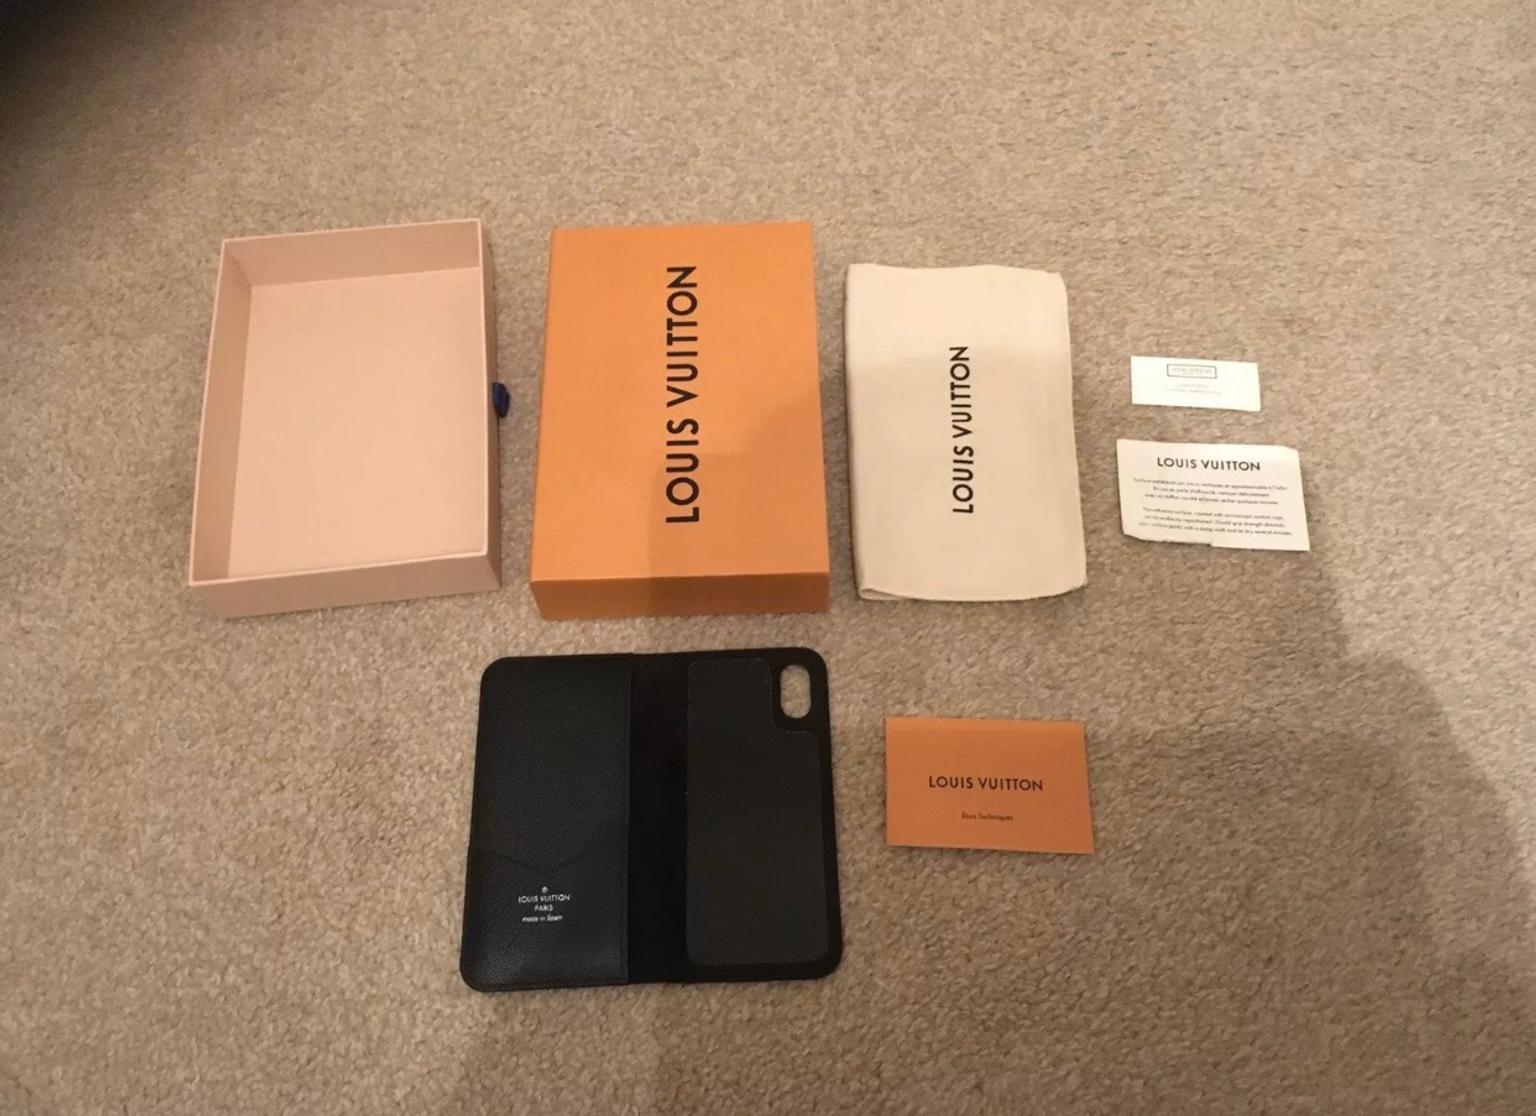 Louis Vuitton iPhone X/XS Folio Case in SW20 London Borough of Sutton for £100.00 for sale | Shpock